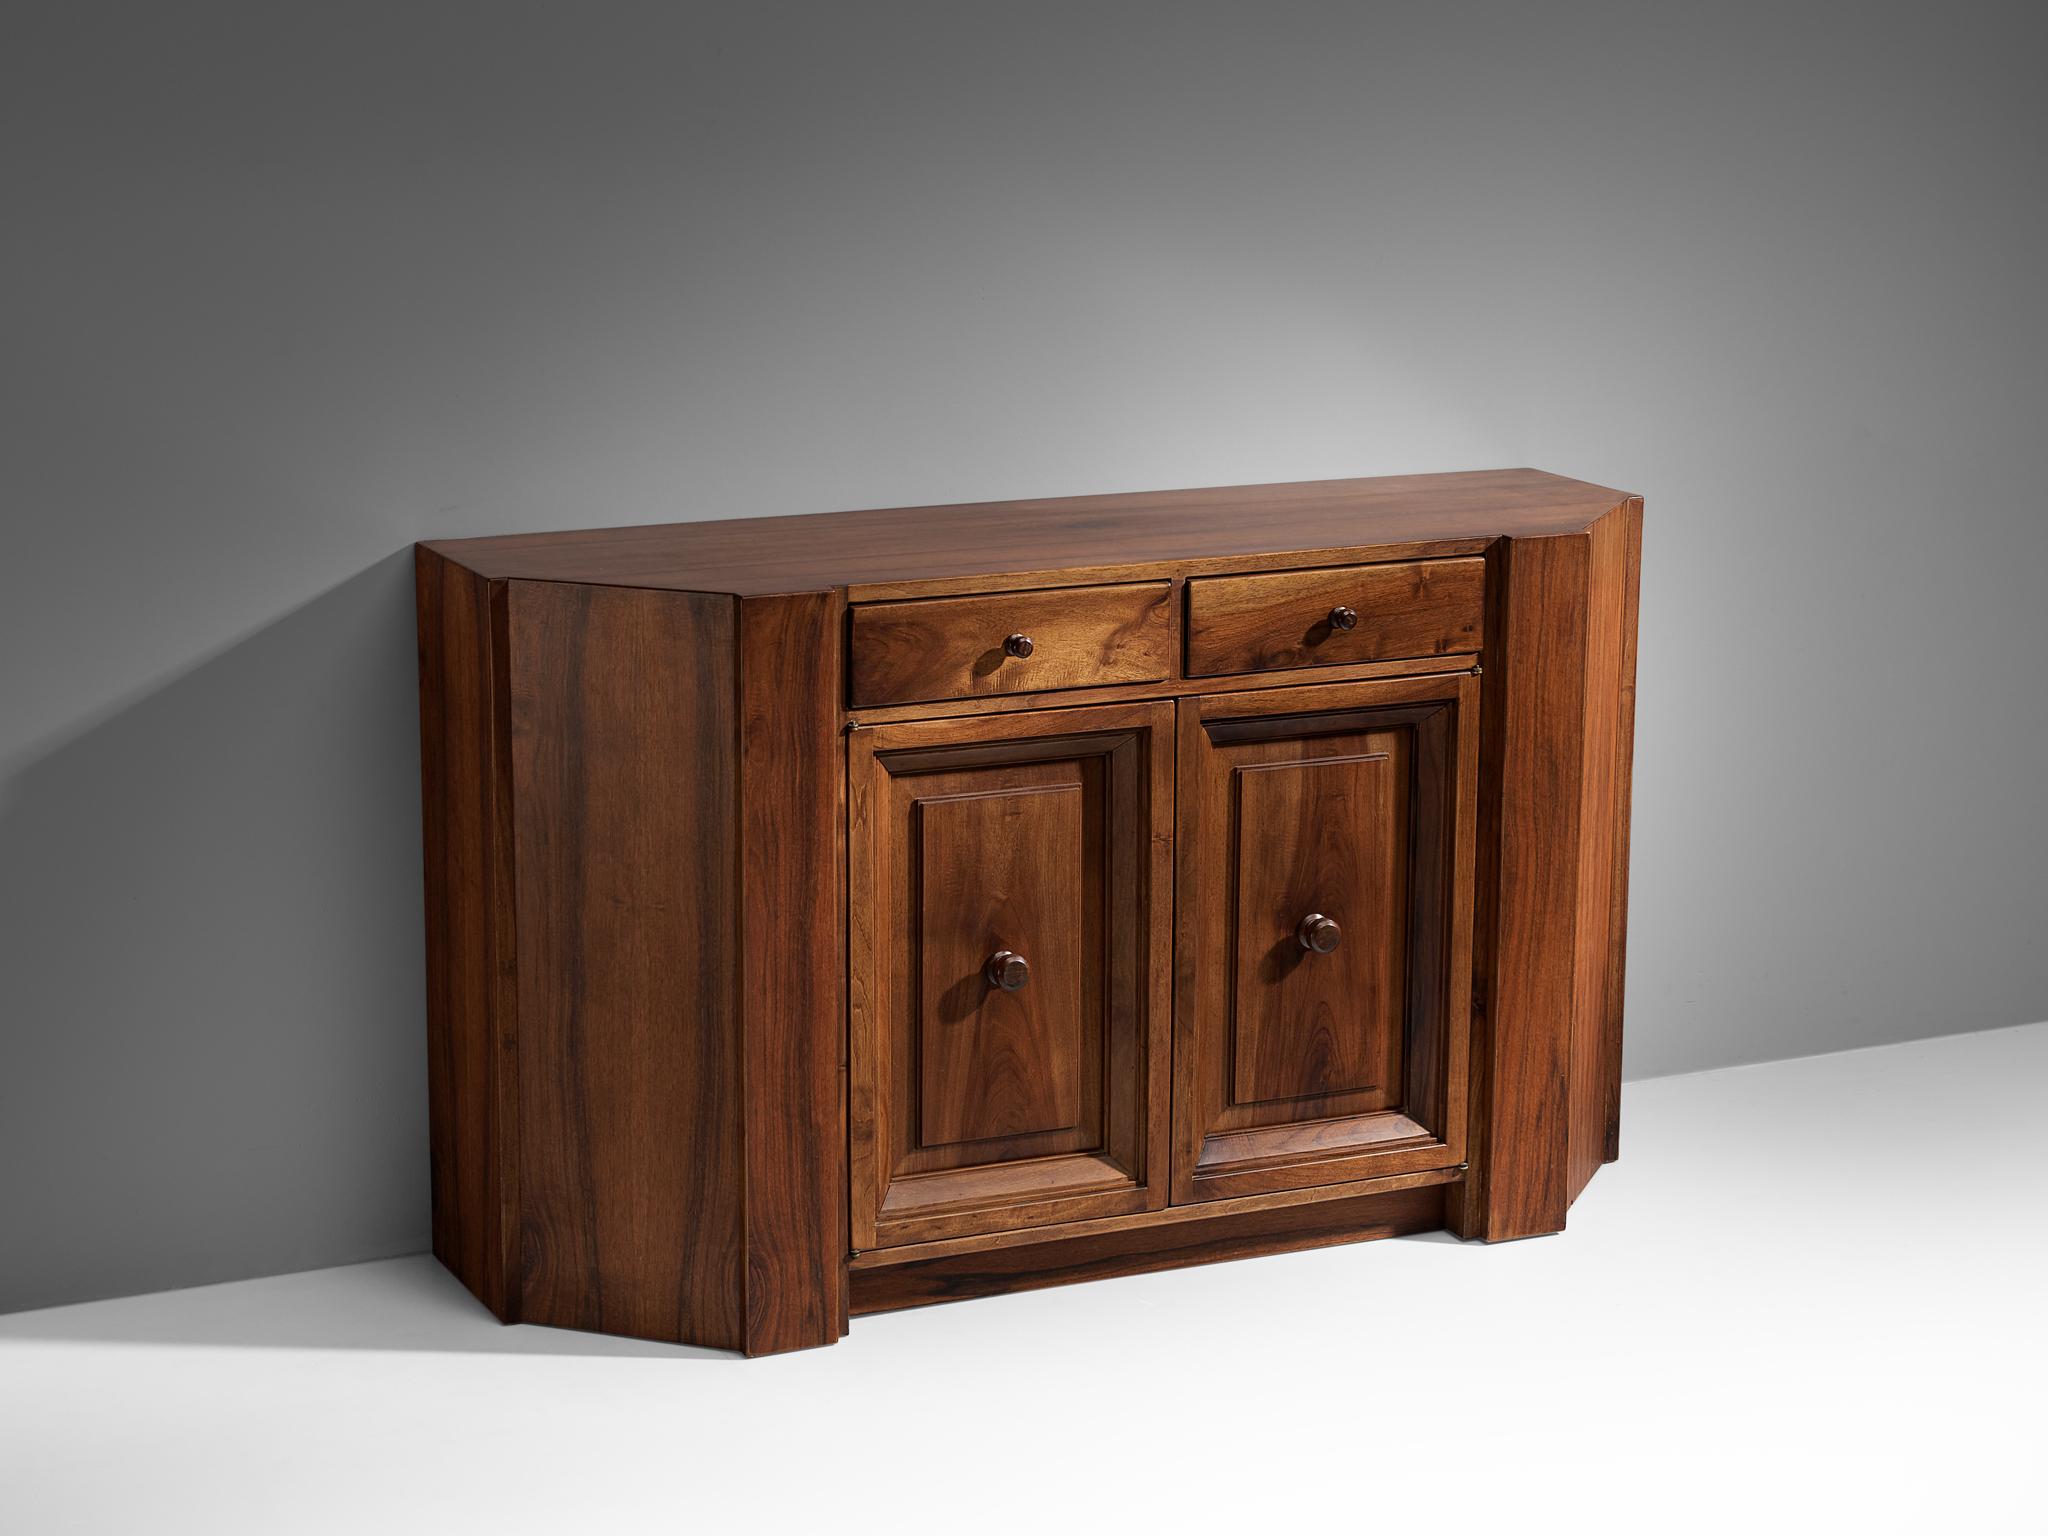 Giuseppe Rivadossi, cabinet, walnut, Italy, 1970s

This striking cabinet by Giuseppe Rivadossi pleases the eye by all means. The body of this piece is composed of large panels of walnut wood and small and elegant handles on both doors. Under the top